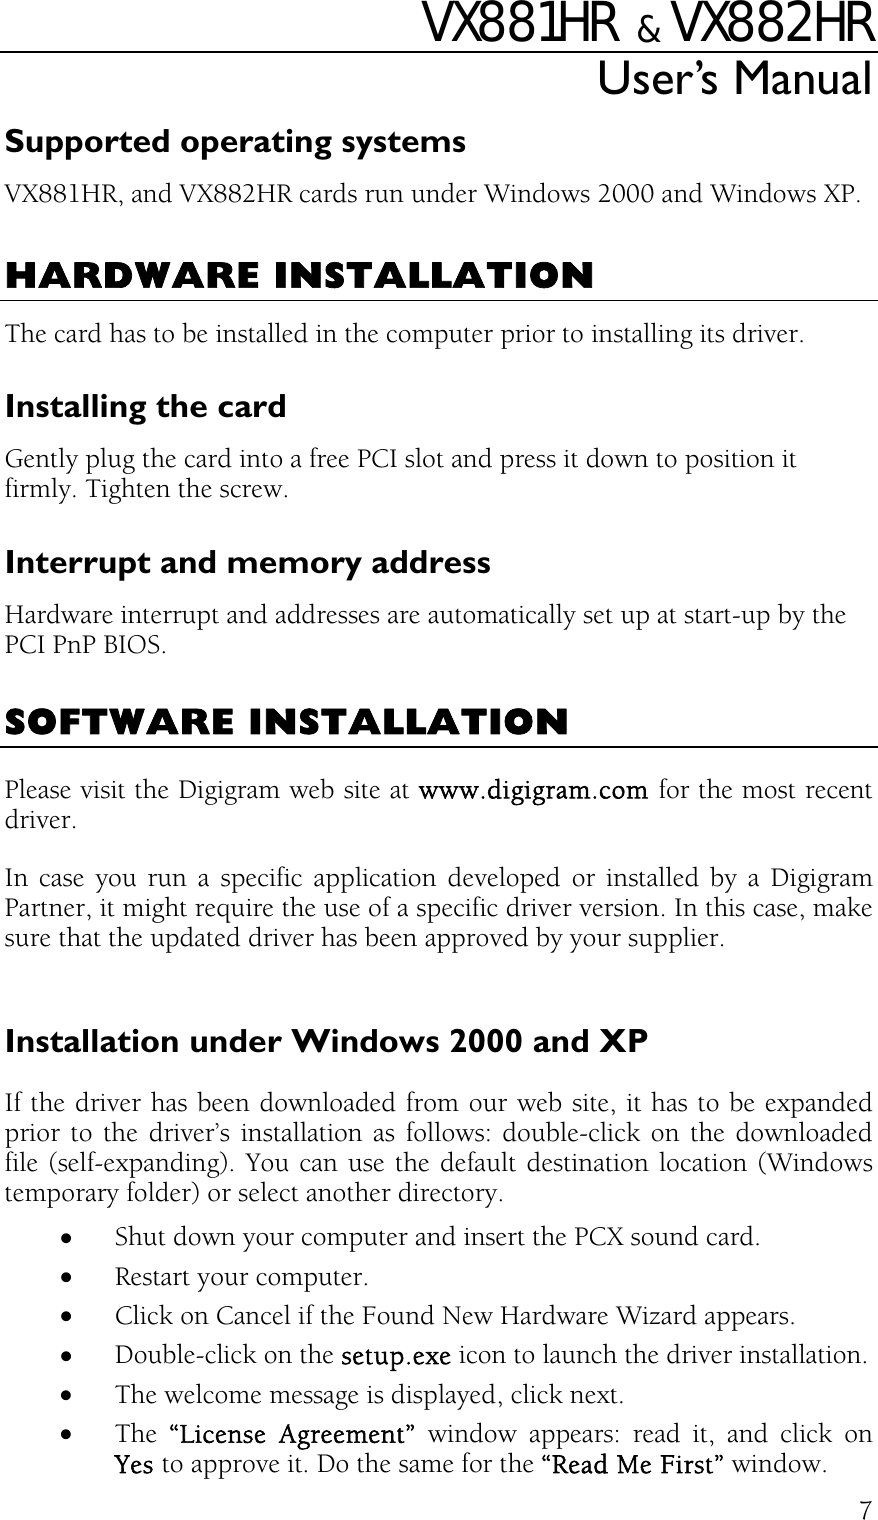 VX881HR   &amp;  VX882HR User’s Manual  7Supported operating systems VX881HR, and VX882HR cards run under Windows 2000 and Windows XP.  HARDWARE INSTALLATION The card has to be installed in the computer prior to installing its driver. Installing the card Gently plug the card into a free PCI slot and press it down to position it firmly. Tighten the screw. Interrupt and memory address Hardware interrupt and addresses are automatically set up at start-up by the PCI PnP BIOS.  SOFTWARE INSTALLATION Please visit the Digigram web site at www.digigram.com for the most recent driver. In case you run a specific application developed or installed by a Digigram Partner, it might require the use of a specific driver version. In this case, make sure that the updated driver has been approved by your supplier.  Installation under Windows 2000 and XP If the driver has been downloaded from our web site, it has to be expanded prior to the driver’s installation as follows: double-click on the downloaded file (self-expanding). You can use the default destination location (Windows temporary folder) or select another directory. •  Shut down your computer and insert the PCX sound card. •  Restart your computer. •  Click on Cancel if the Found New Hardware Wizard appears. •  Double-click on the setup.exe icon to launch the driver installation. •  The welcome message is displayed, click next. •  The  “License Agreement” window appears: read it, and click on Yes to approve it. Do the same for the “Read Me First” window. 